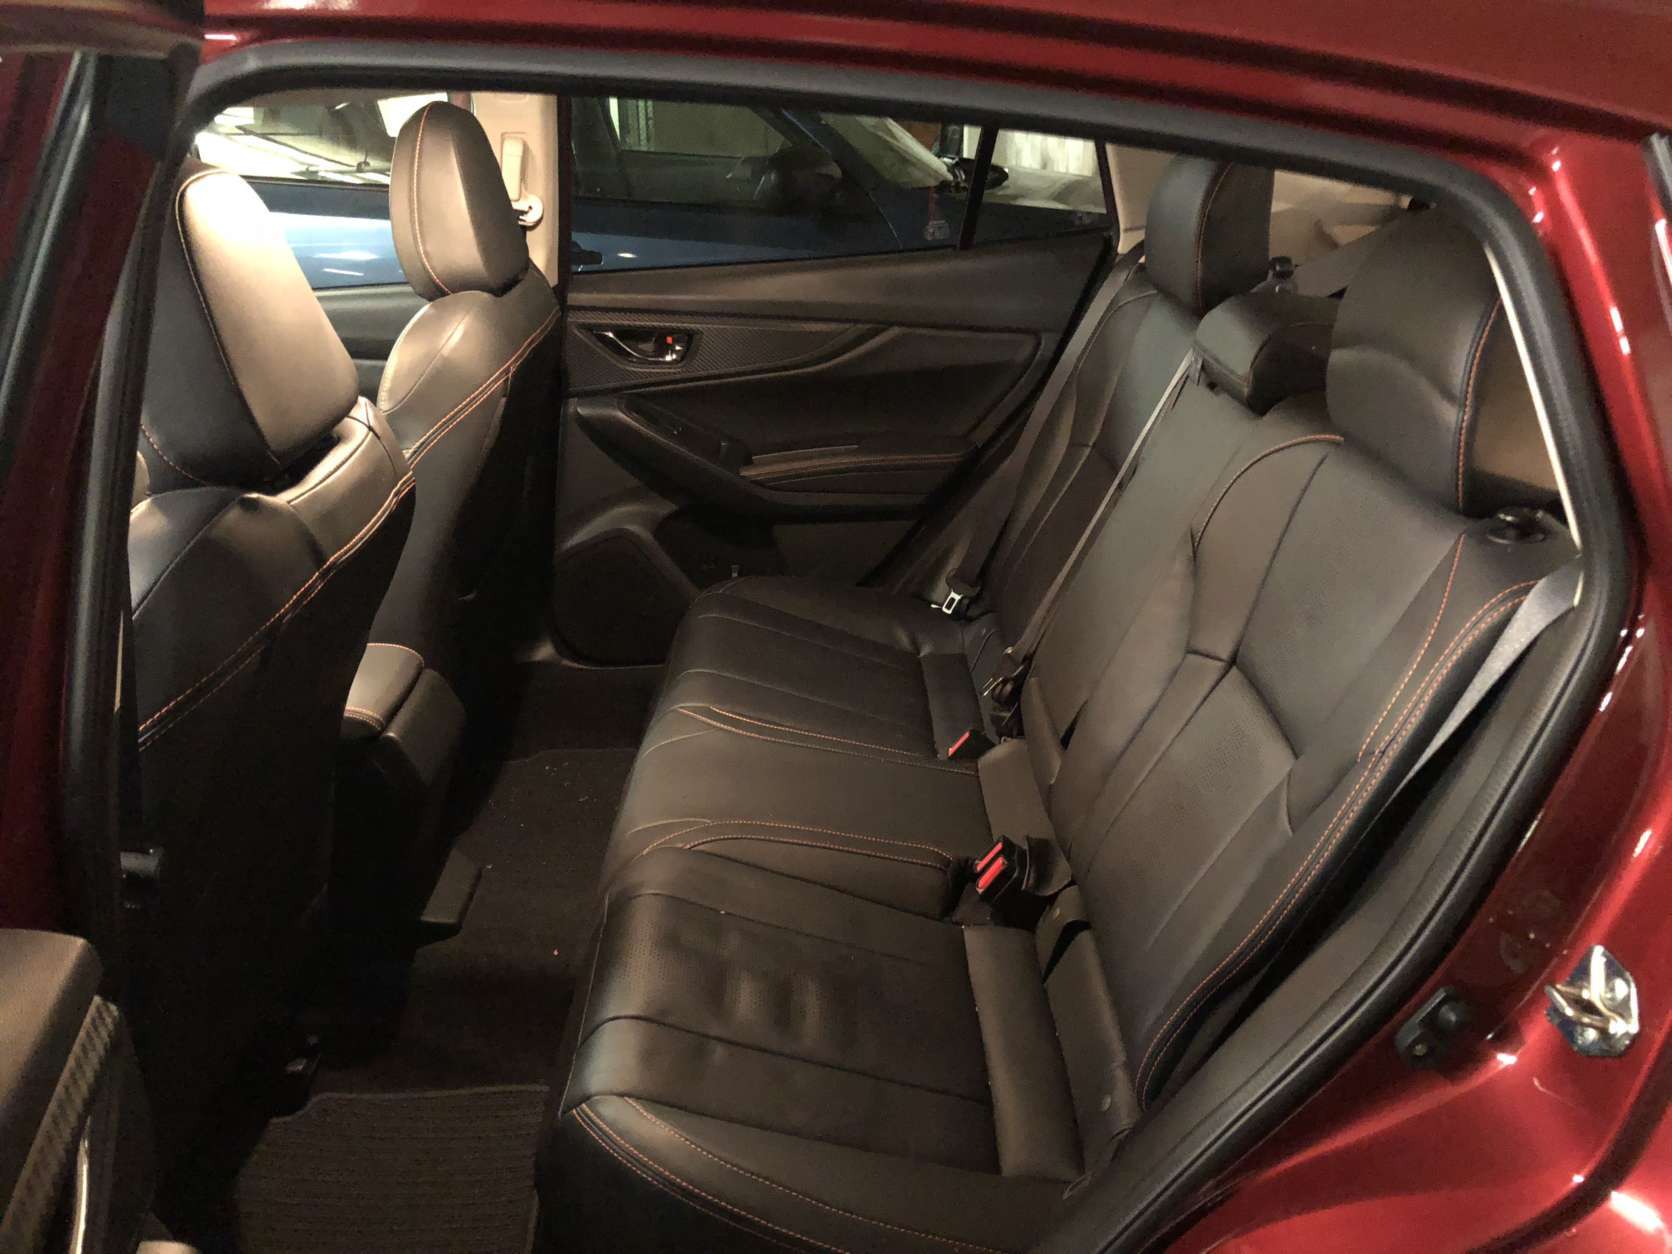 The orange stitching on the seats, steering wheel and throughout the interior adds a bit of color and pop inside. Space is good for this class with decent head and legroom both up front and in the rear seats; it has more space in the back than before. It is lacking vents for rear seat passengers. (WTOP/Mike Parris) 